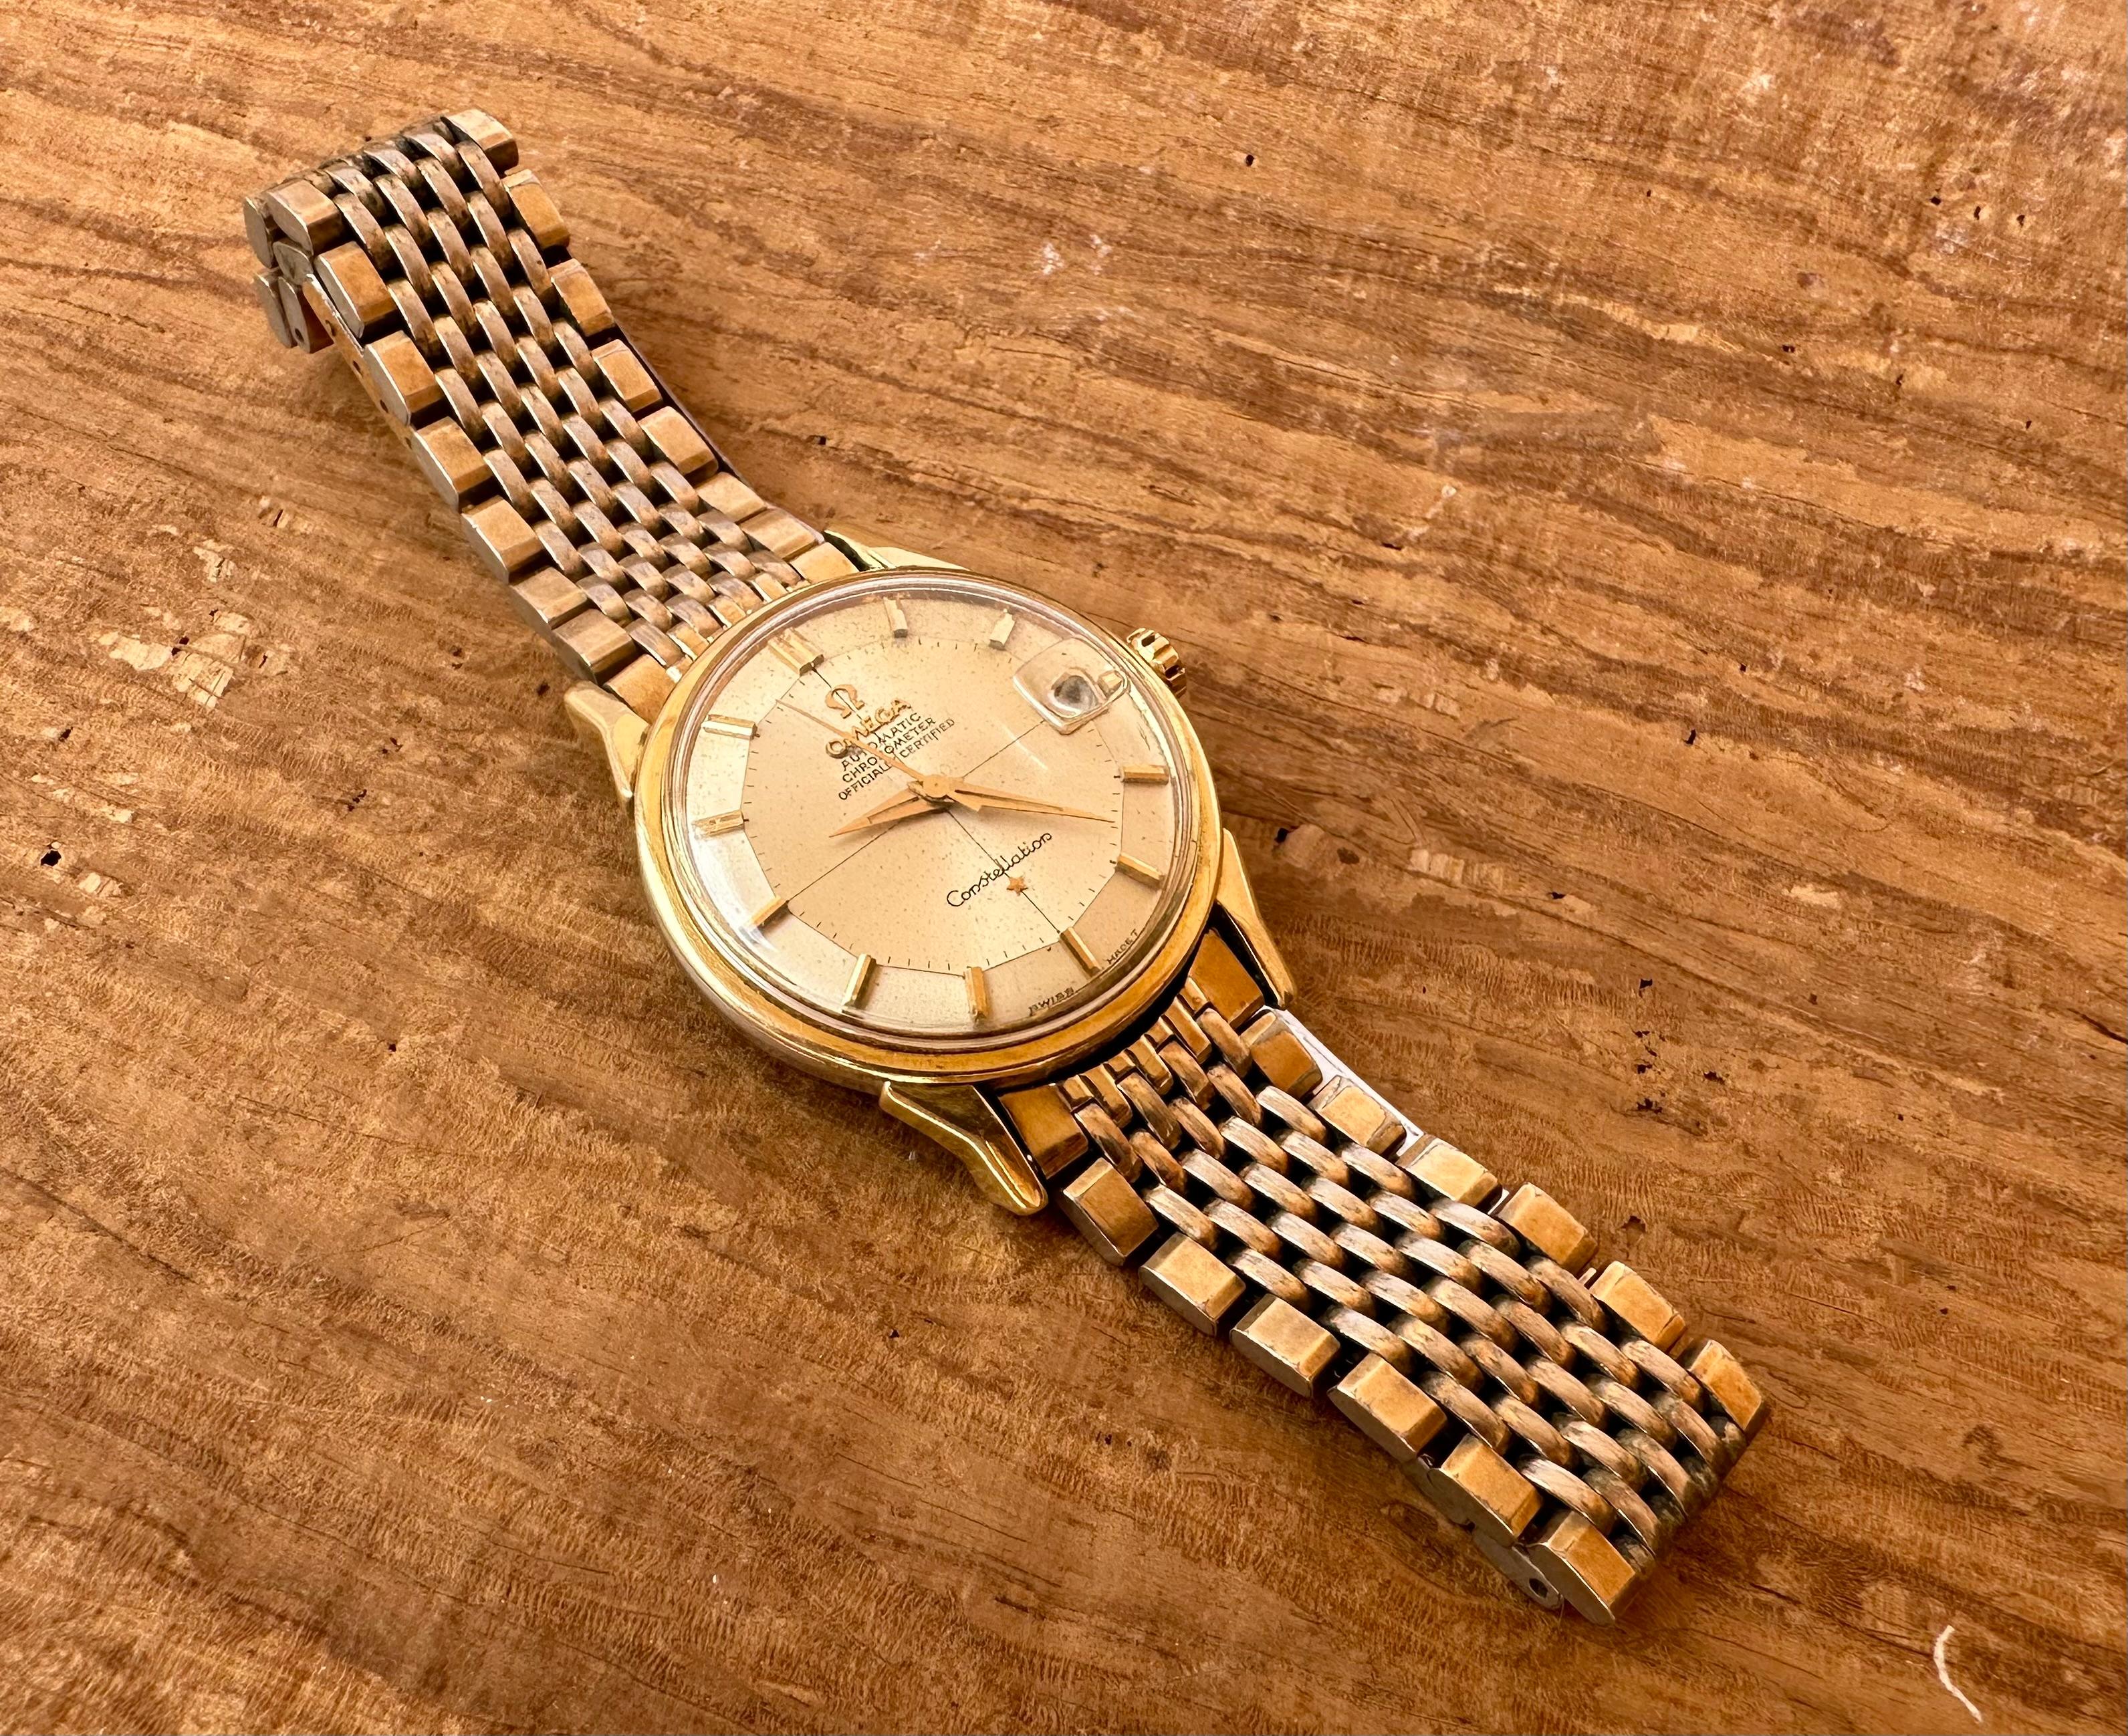 Brand: Omega

Model: Constellation 

Reference Number:168.005

Country Of Manufacture: Switzerland

Movement: Automatic

Case Material: Gold Plated & Stainless steel

Measurements : Case width: 34 mm

Band Type : Gold Plated &Stainless steel

Band